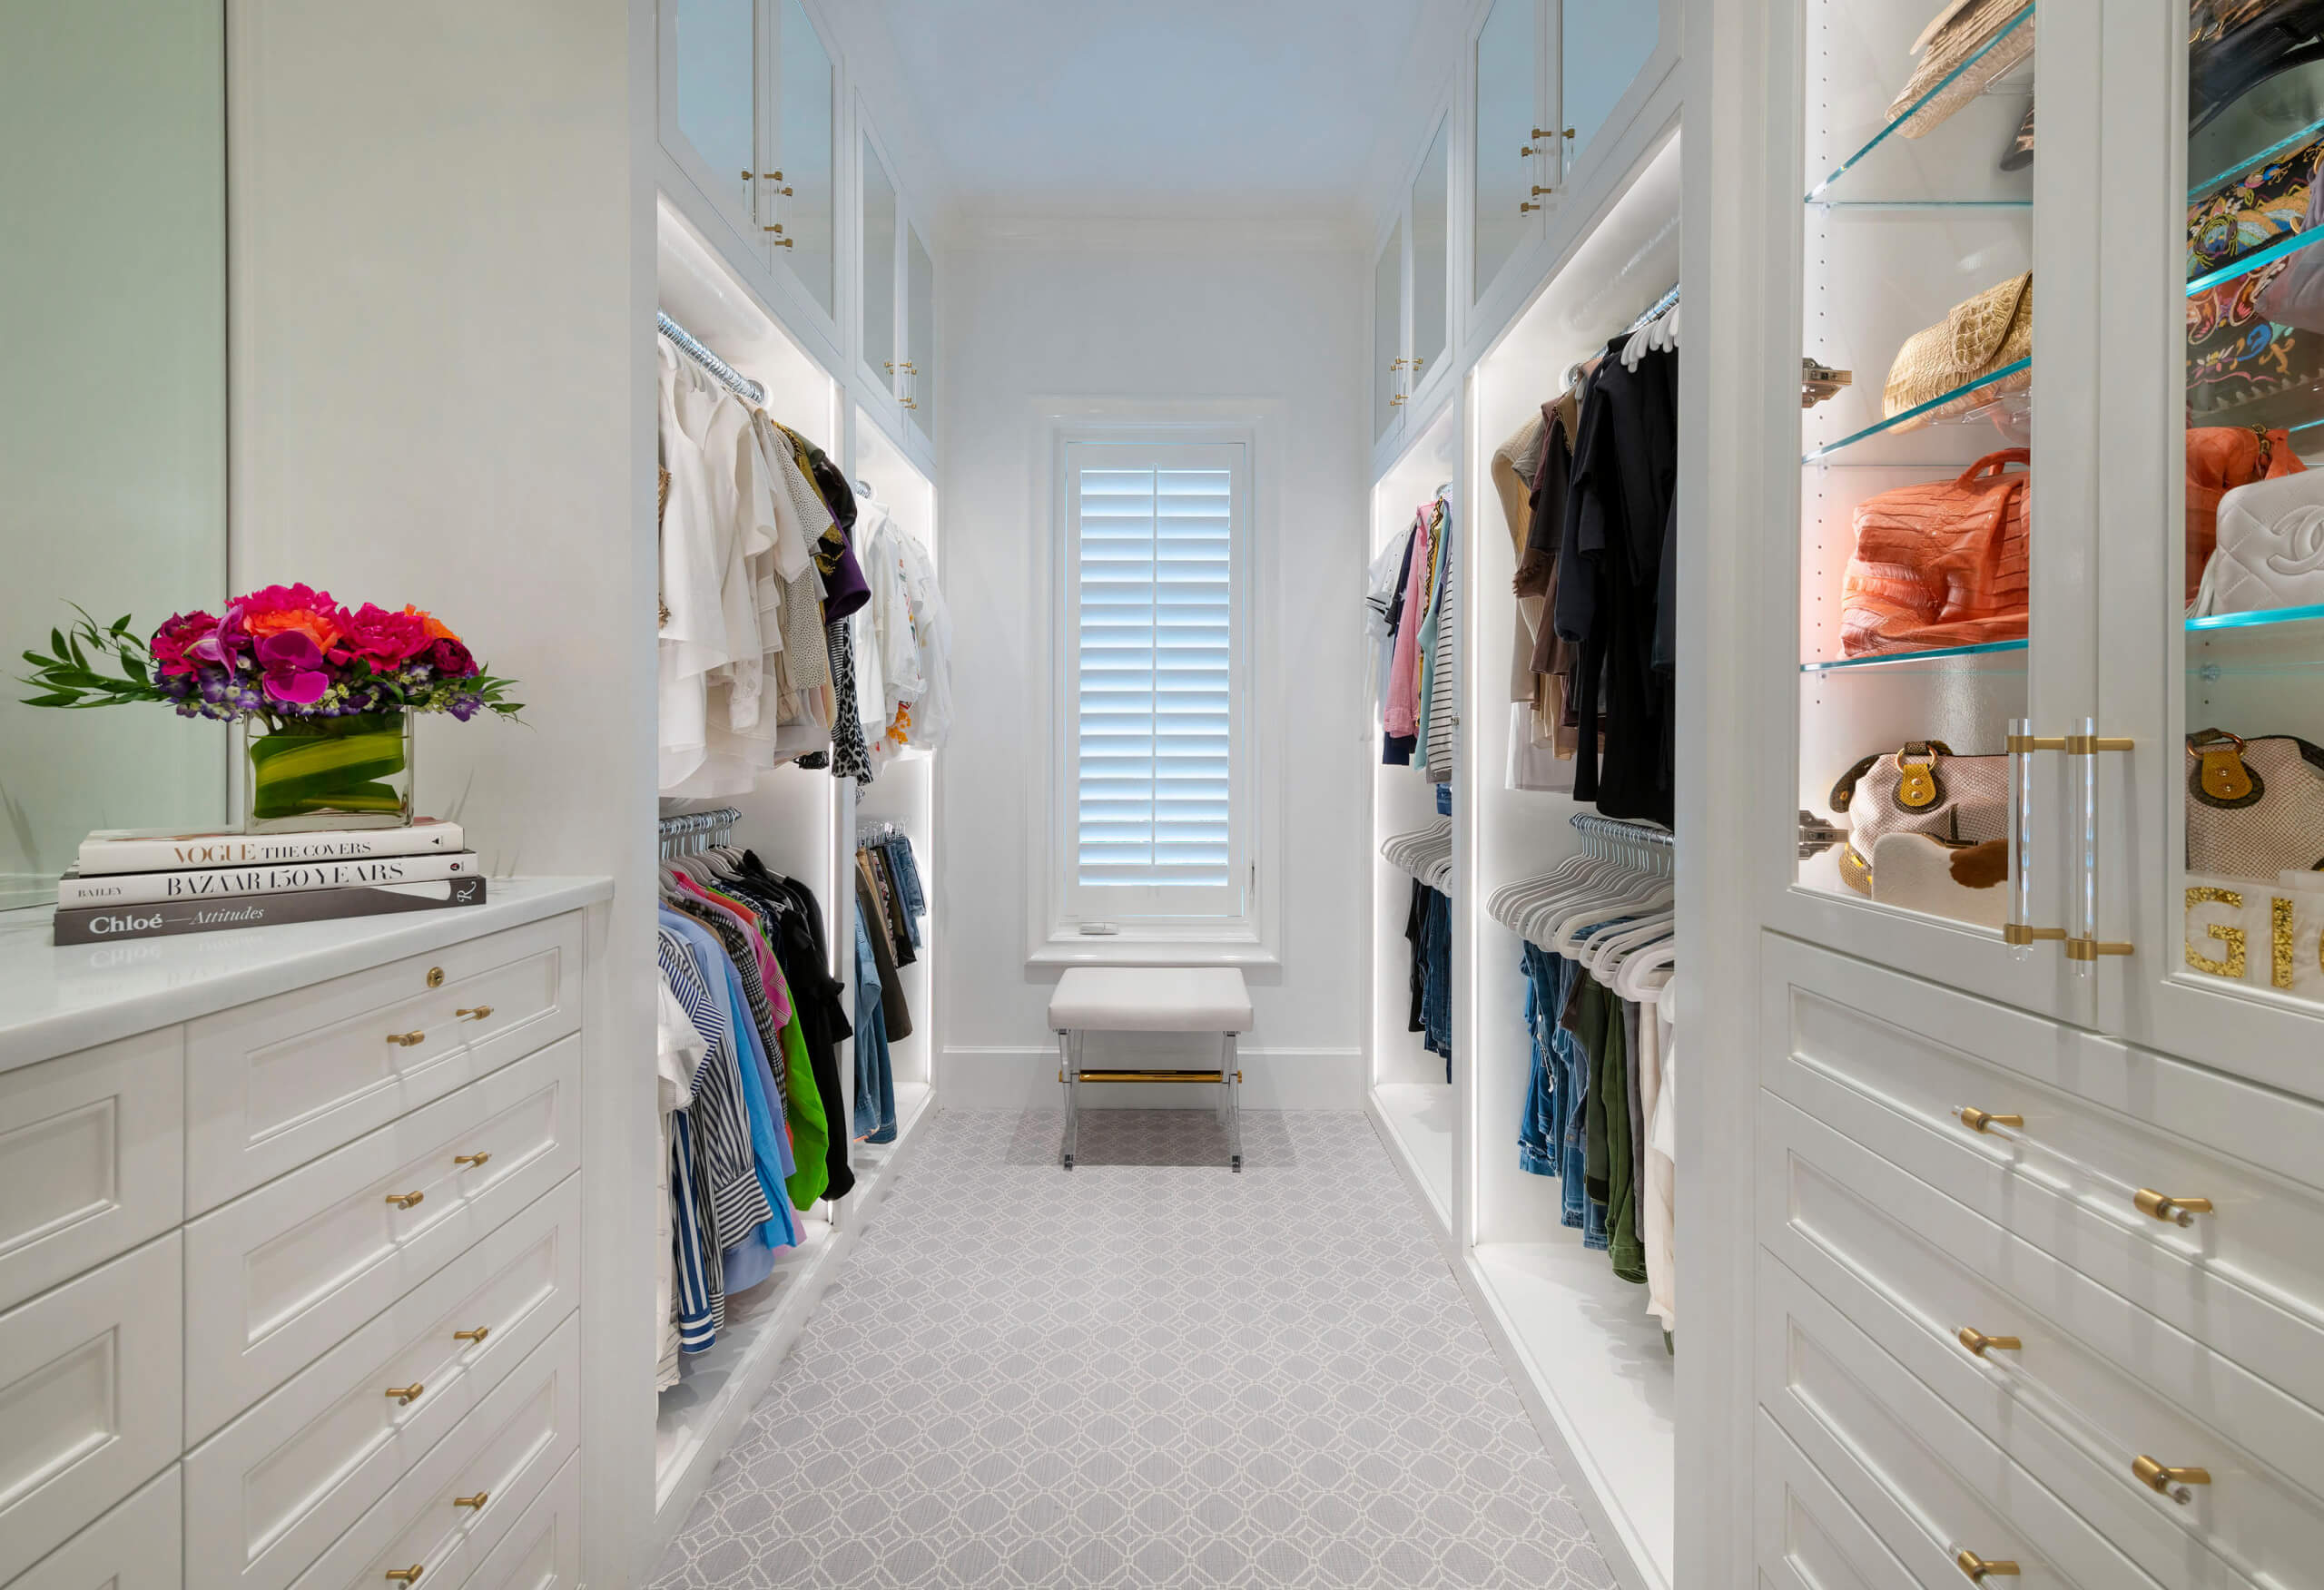 Bedroom Closet 2 - Transform Your Bedroom with These Stylish Closet Ideas